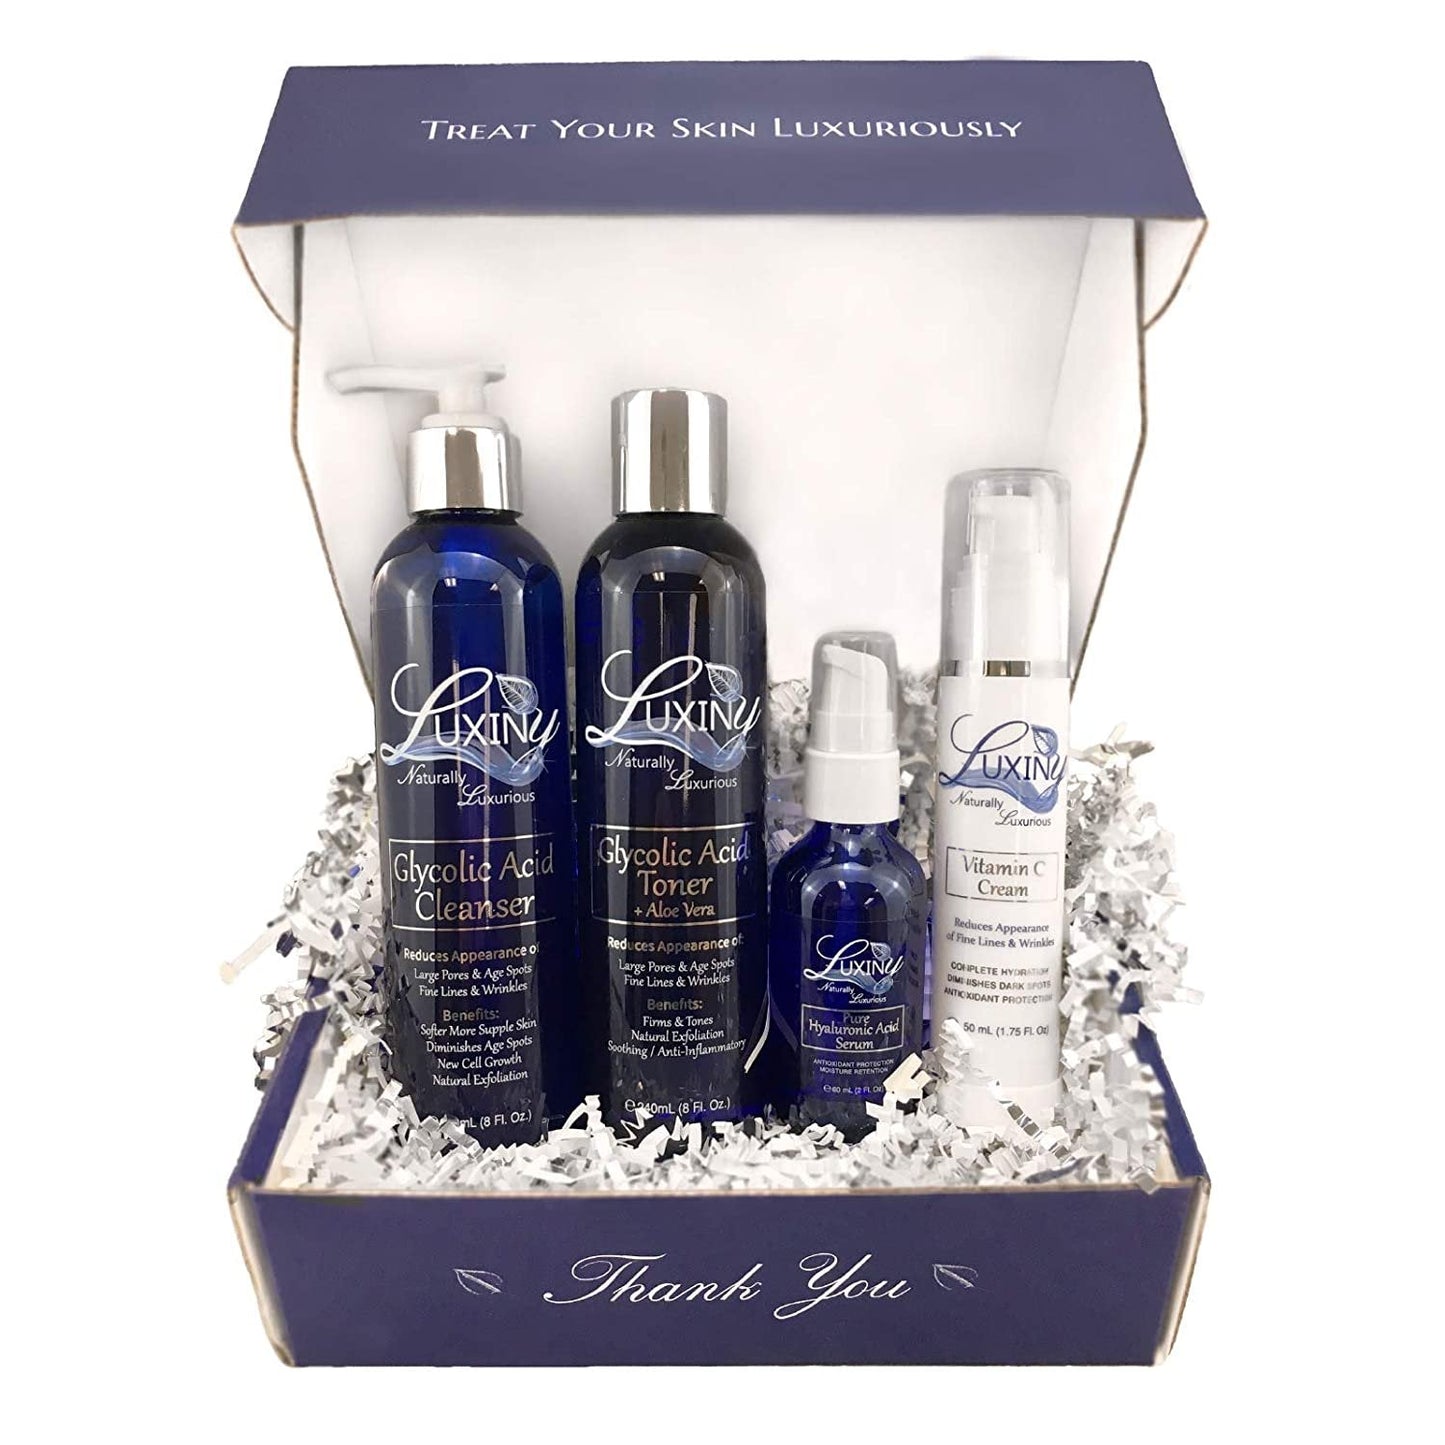 Luxiny Skin Care set